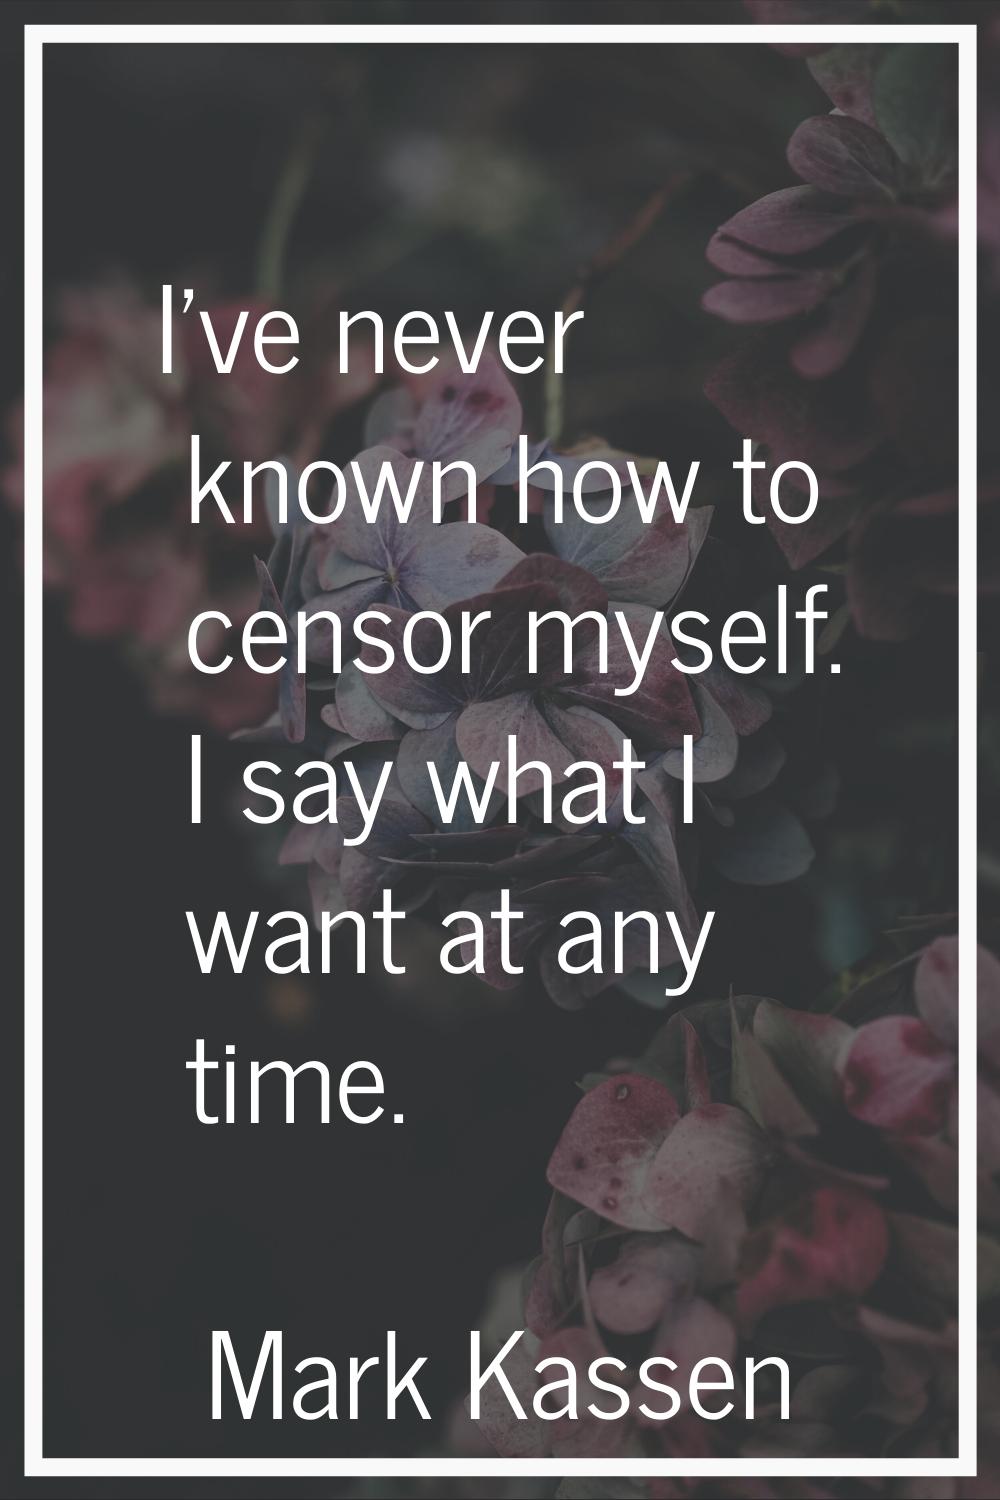 I've never known how to censor myself. I say what I want at any time.